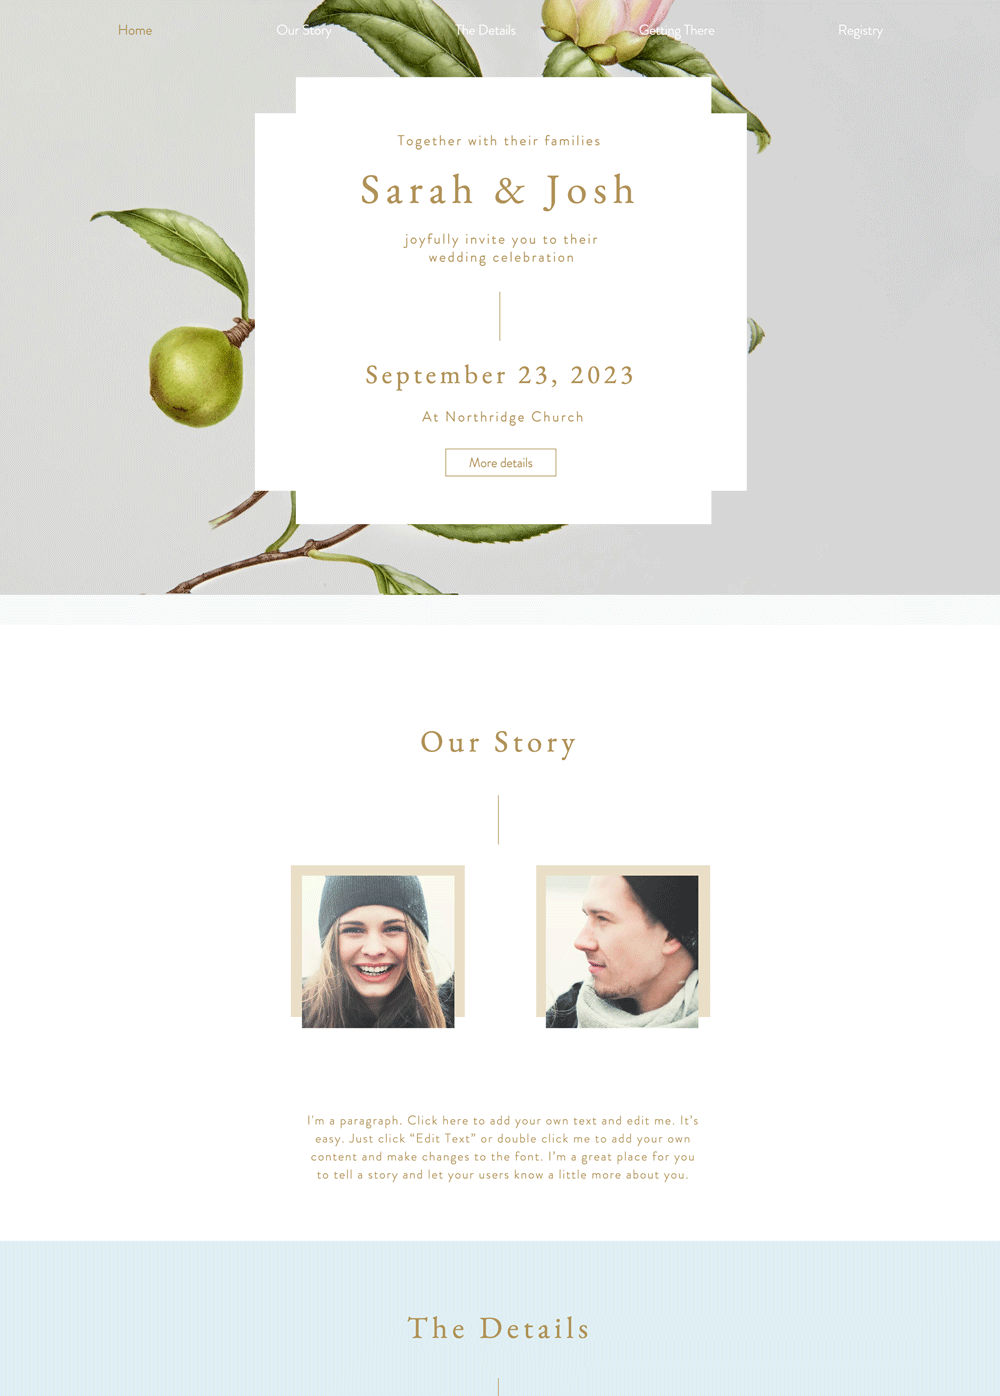 screencaepture-wix-website-template-view-html-1787-2022-07-07-13_41_30.png